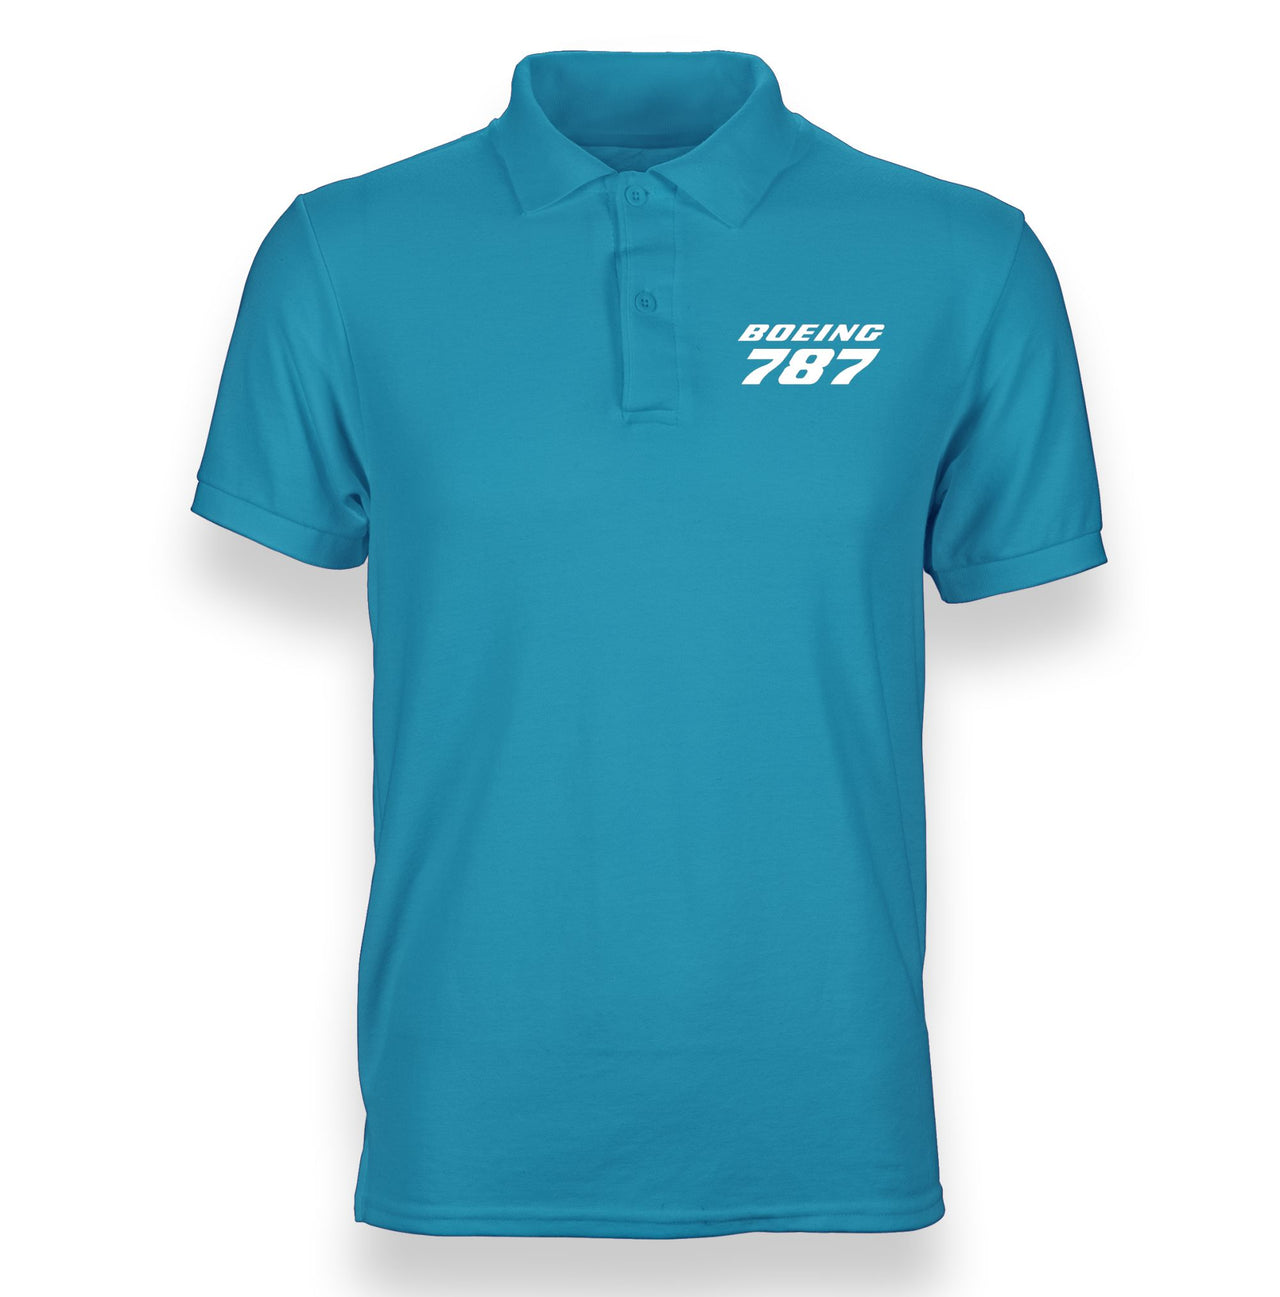 Boeing 787 & Text Designed "WOMEN" Polo T-Shirts